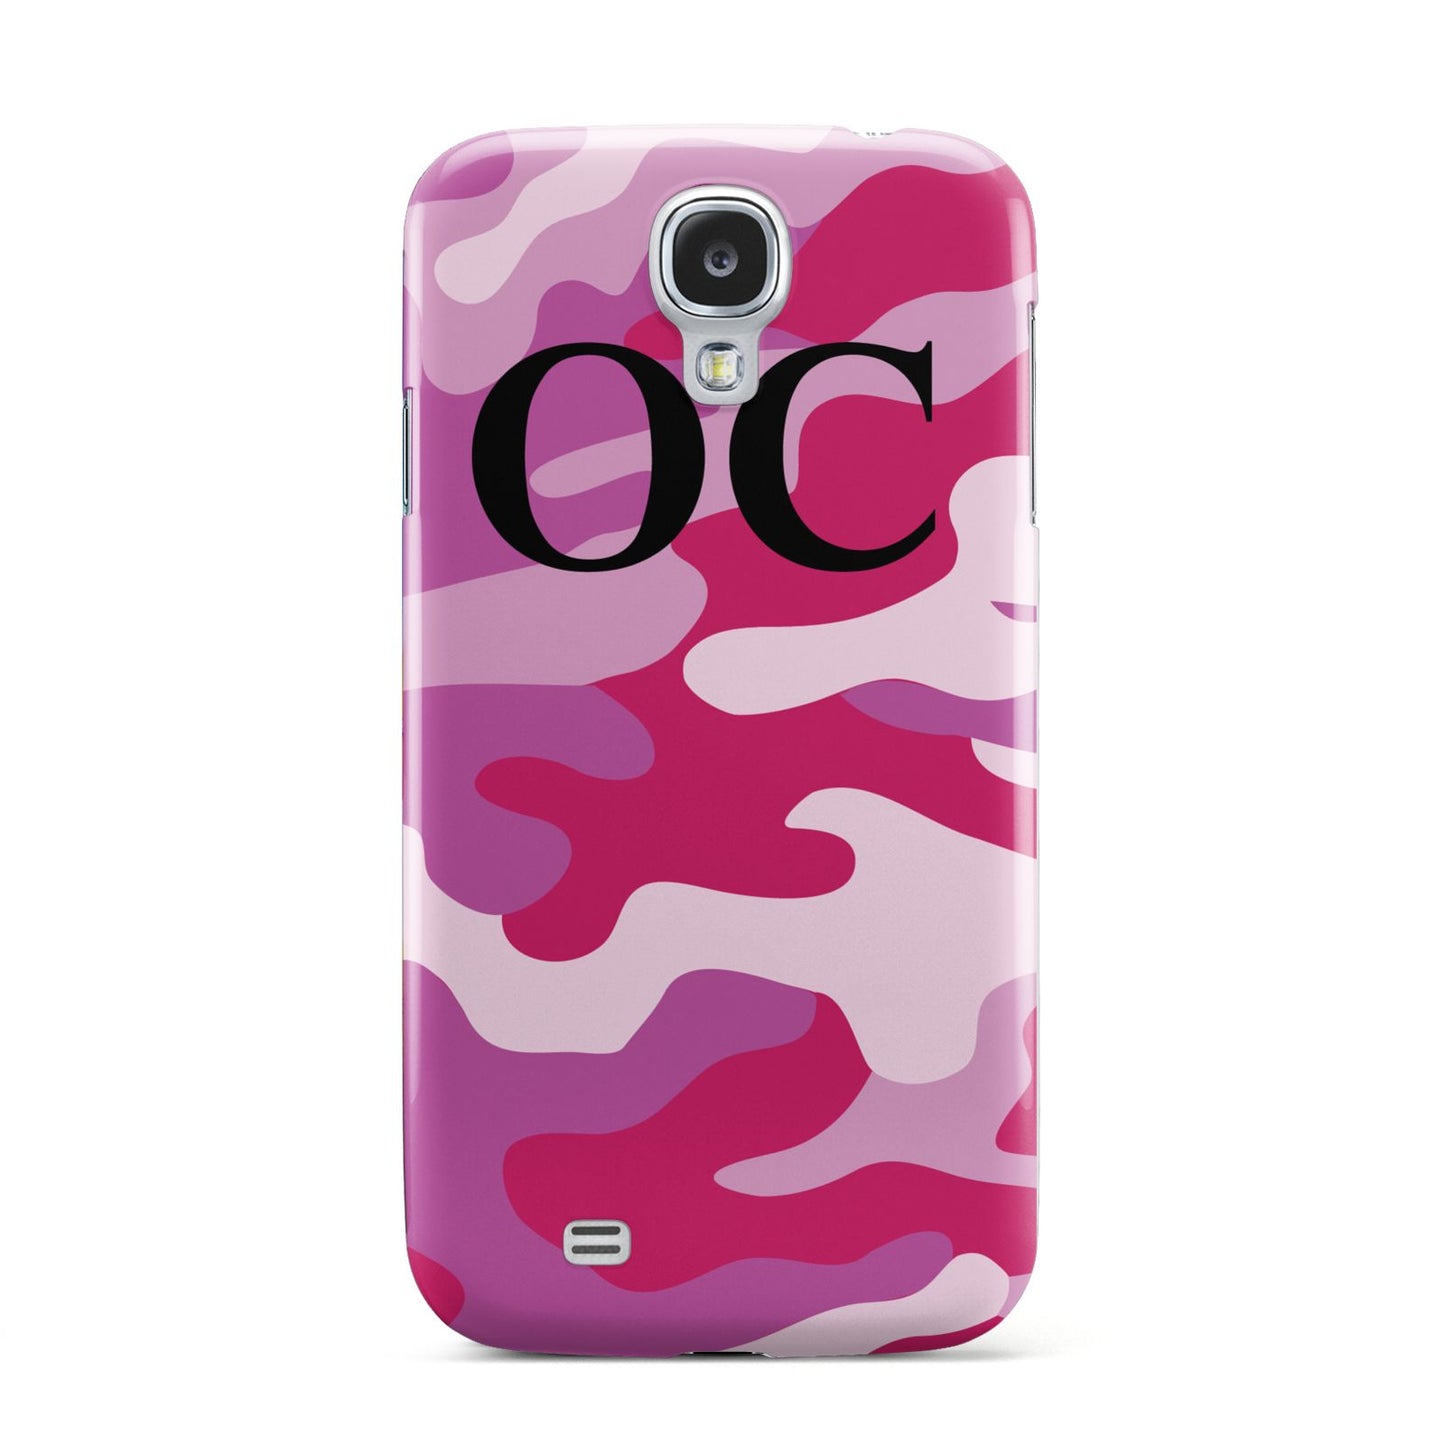 Camouflage Personalised Samsung Galaxy S4 Case